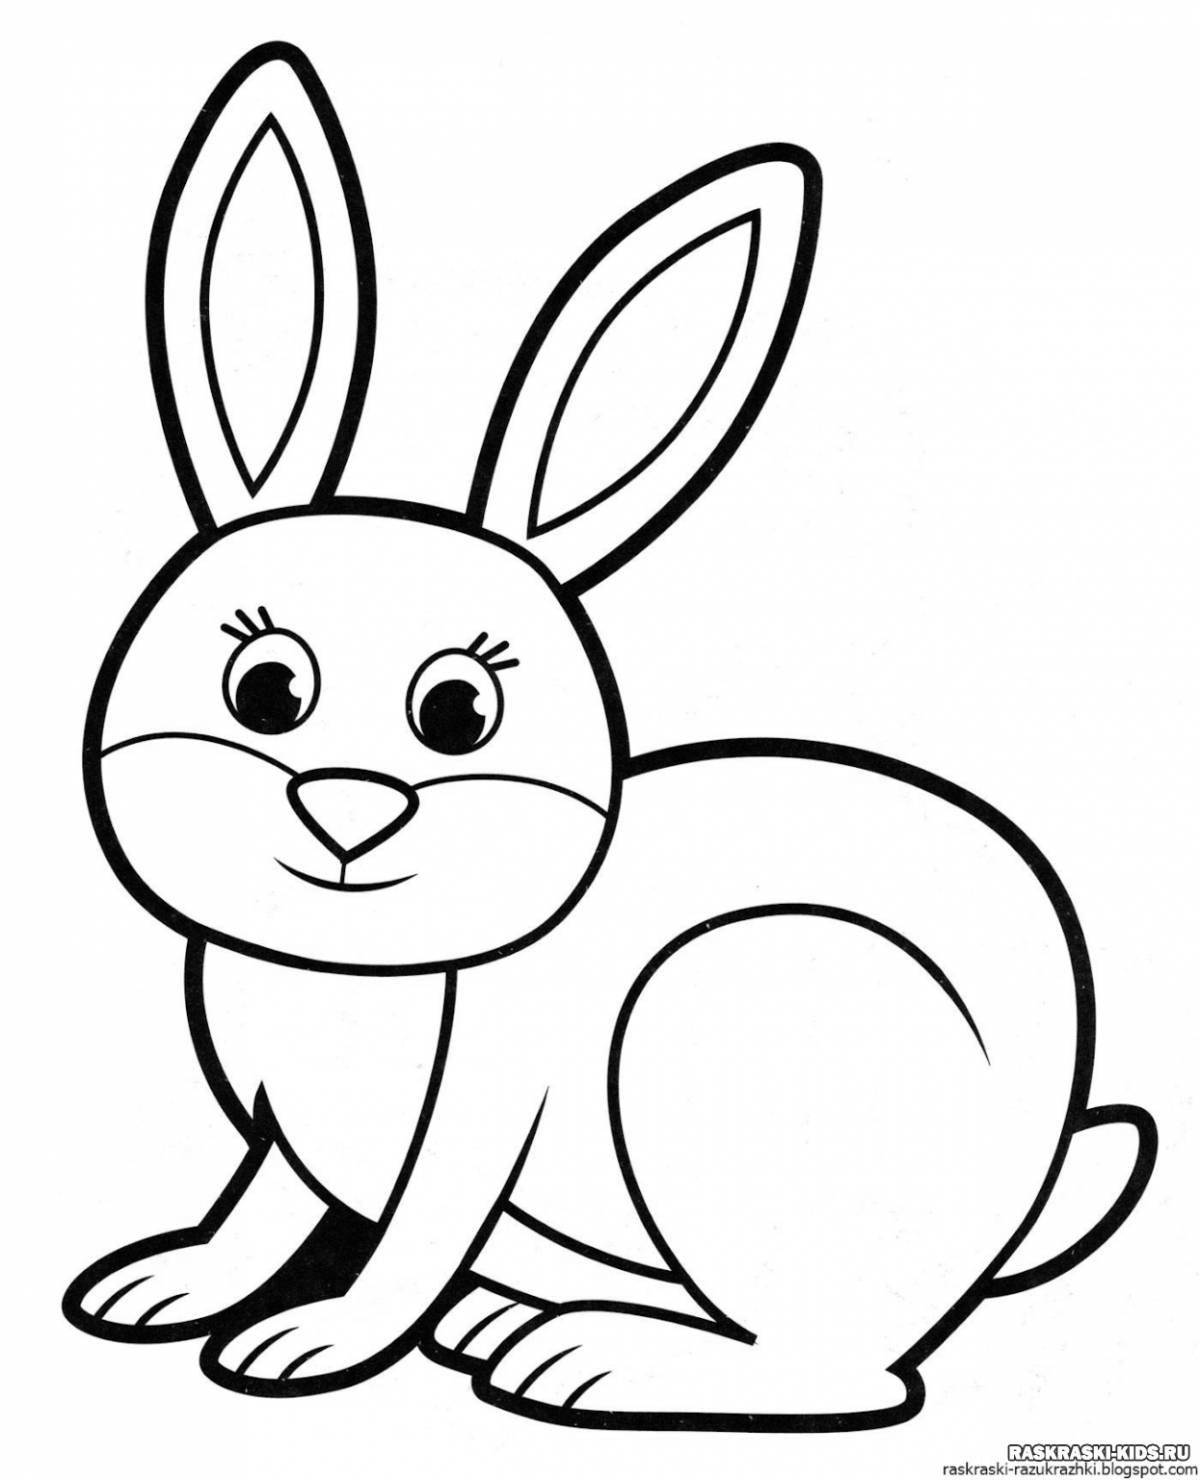 Happy bunny coloring book for kids